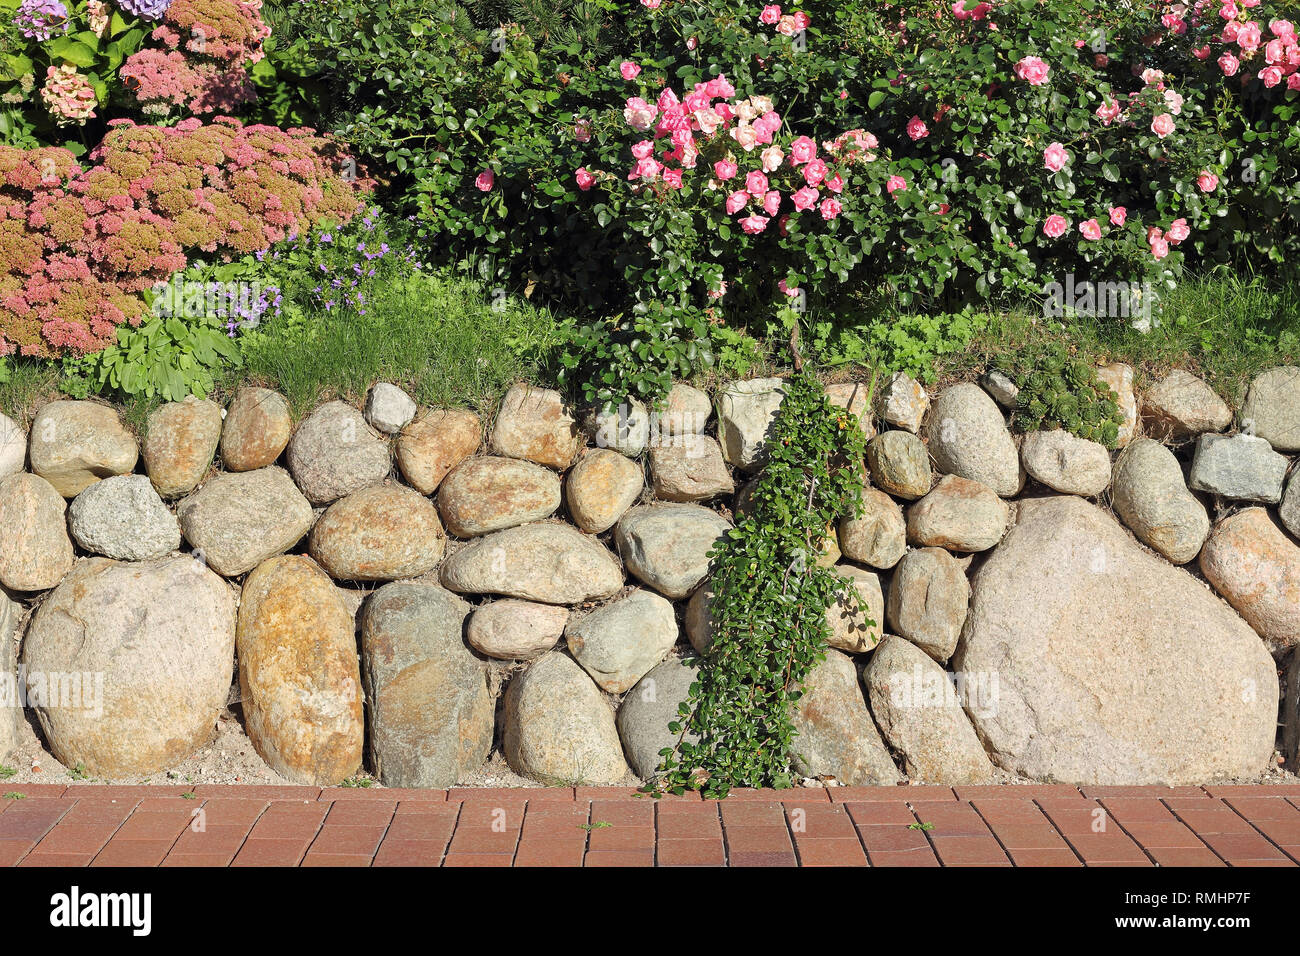 Frisian stone wall planted with flowers Stock Photo